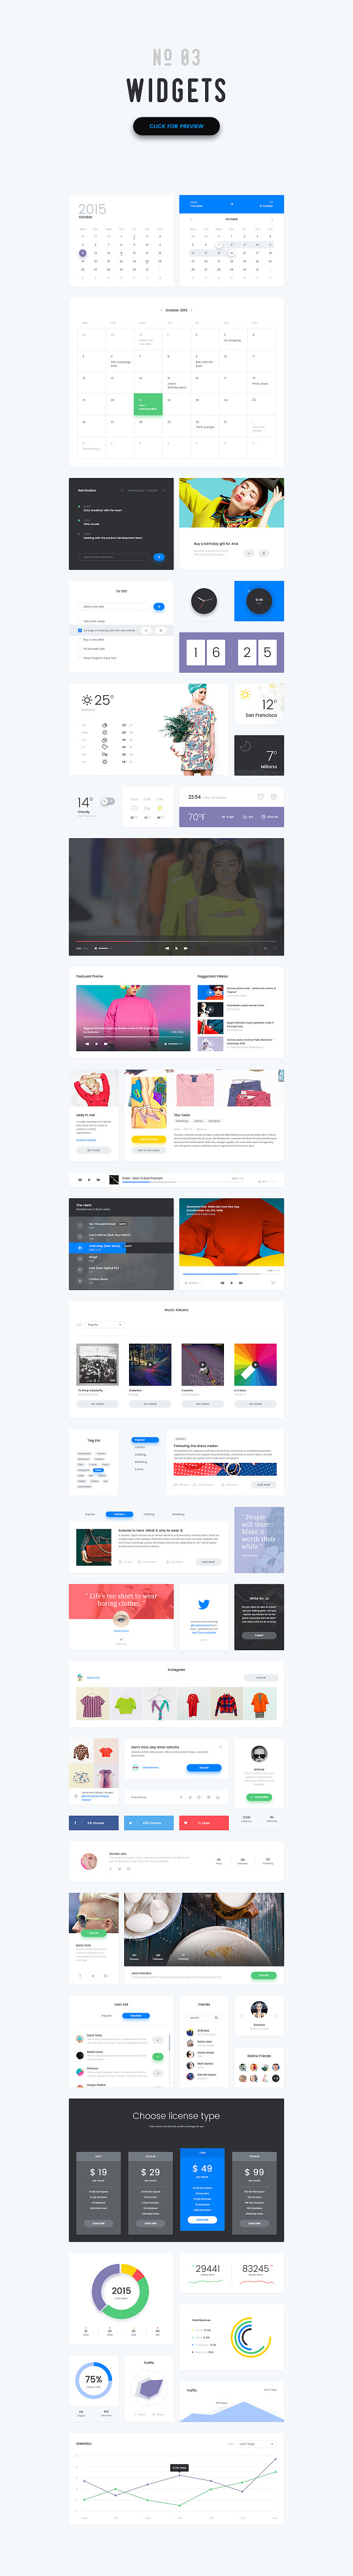 Vivid - Soft Material UI Kit Pack 1 in UI Kits and Libraries - product preview 2